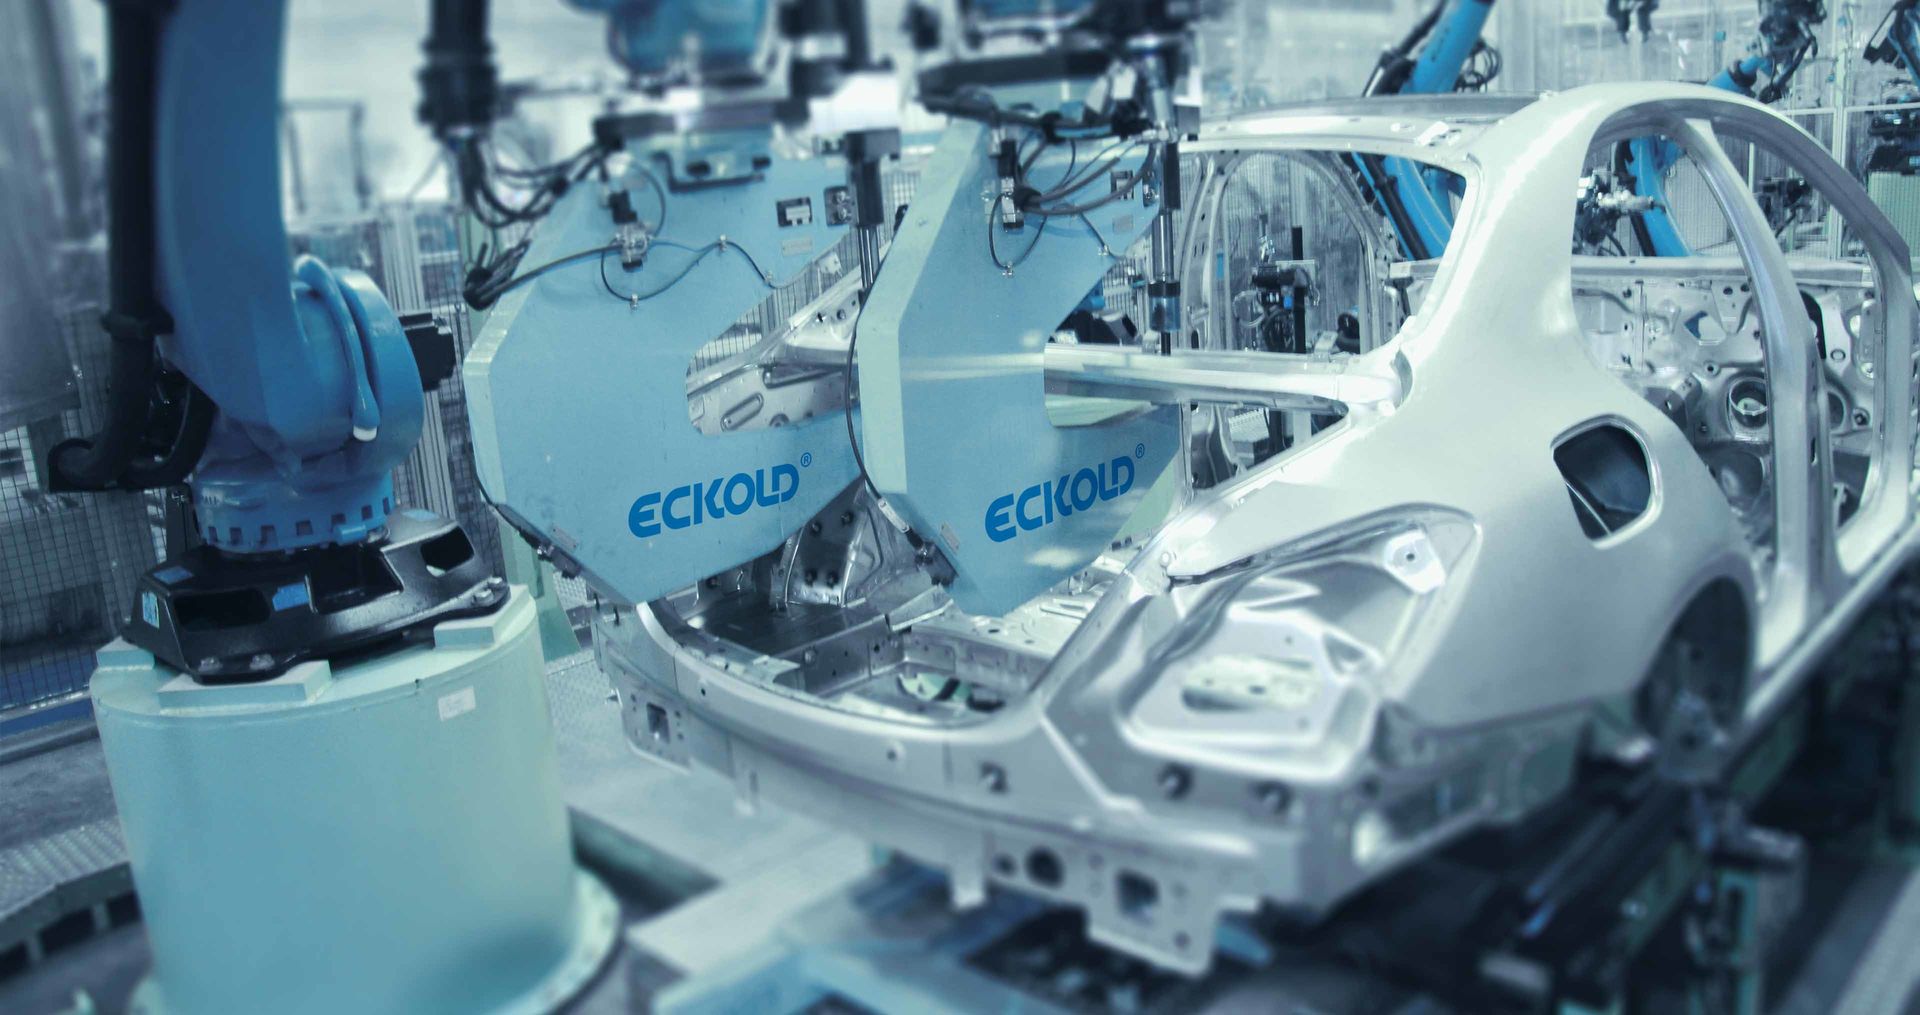 ECKOLD machines in action: Automotive industry